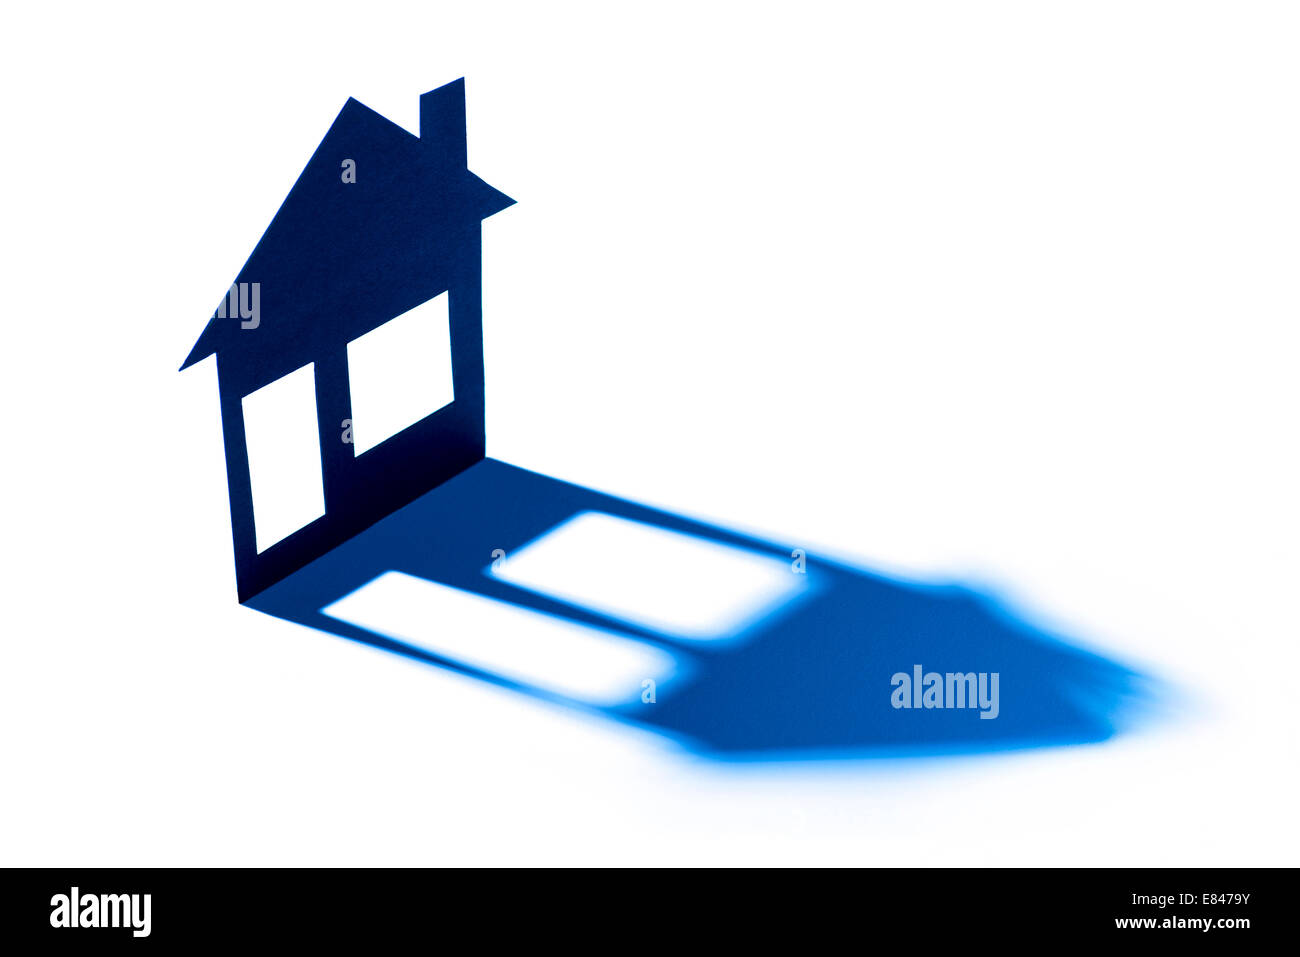 Abstract model of a house casts a long shadow. Stock Photo